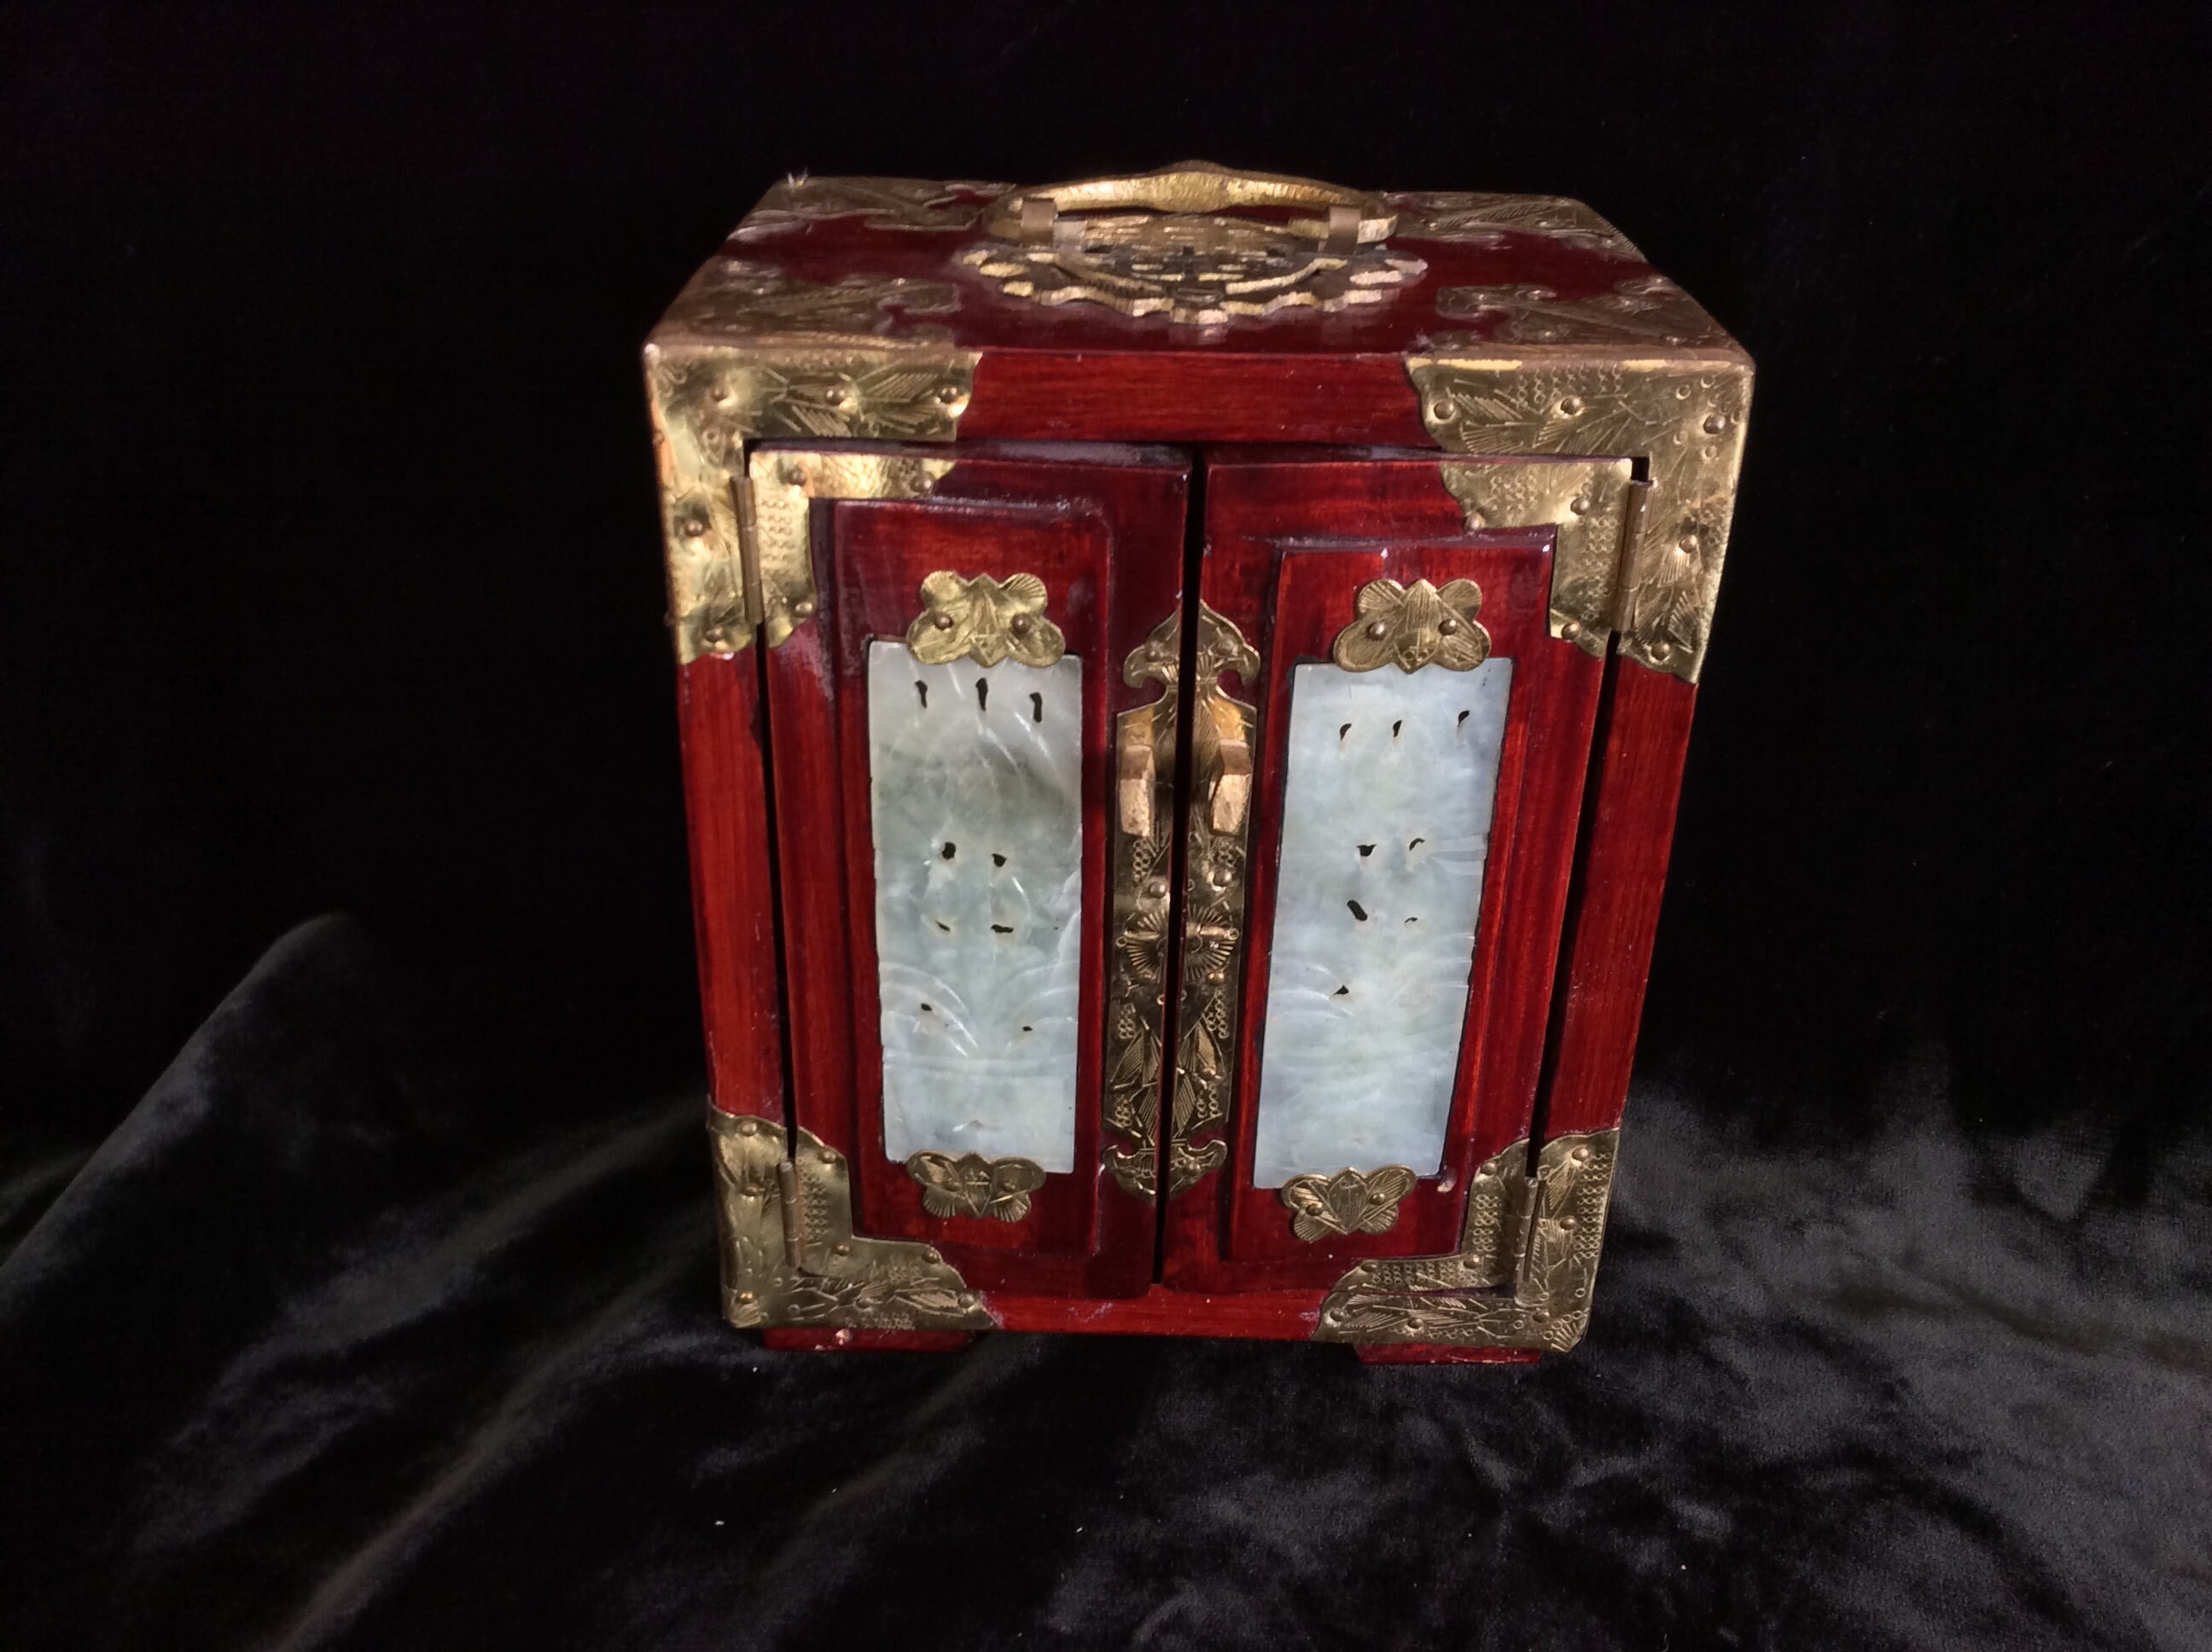 COMPACT SIZE WITH BRASS INLAID VINTAGE CHINESE WOODEN JEWELLERY BOX Restorat 